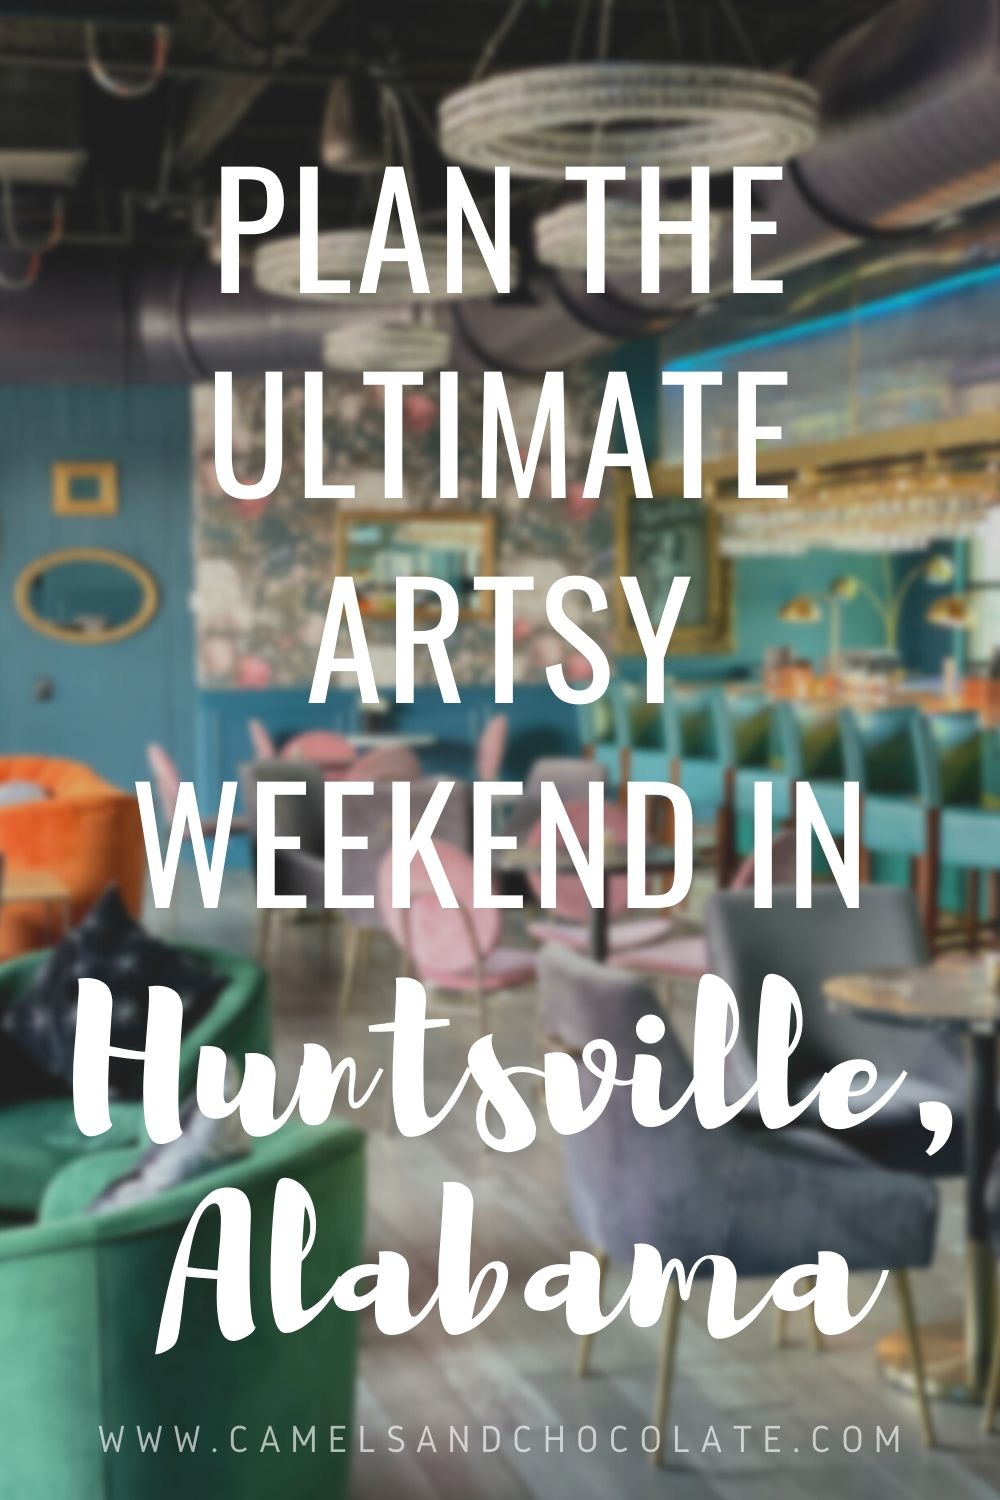 How to visit Huntsville in the summer